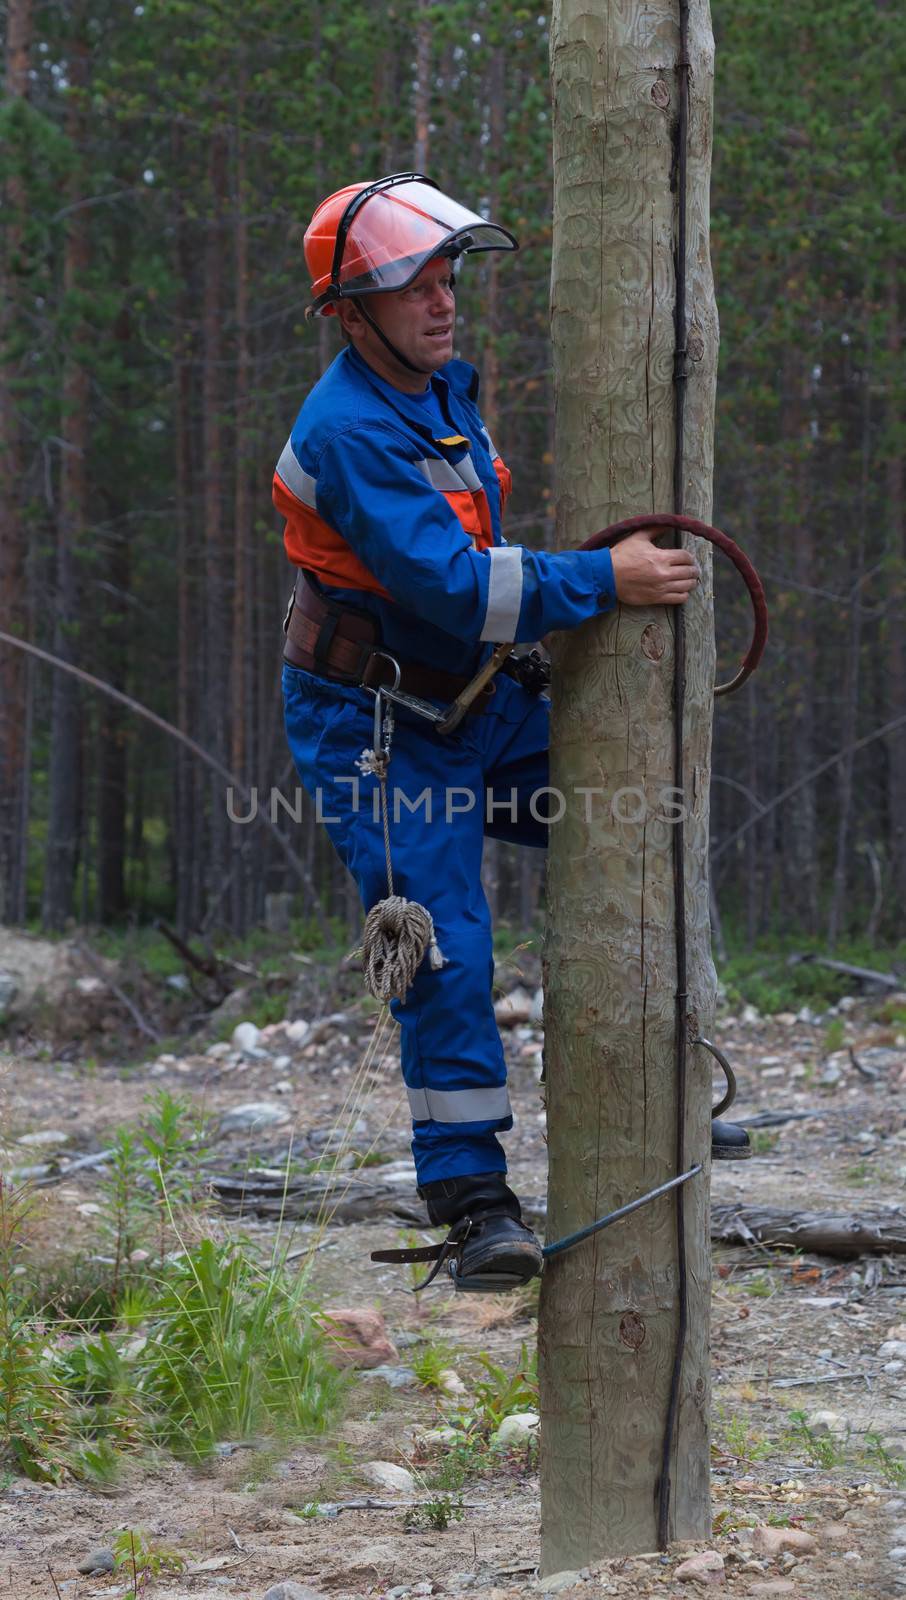 Electrician begins to climb on a power pole with a claw-pomoshyu manholes and safety belt